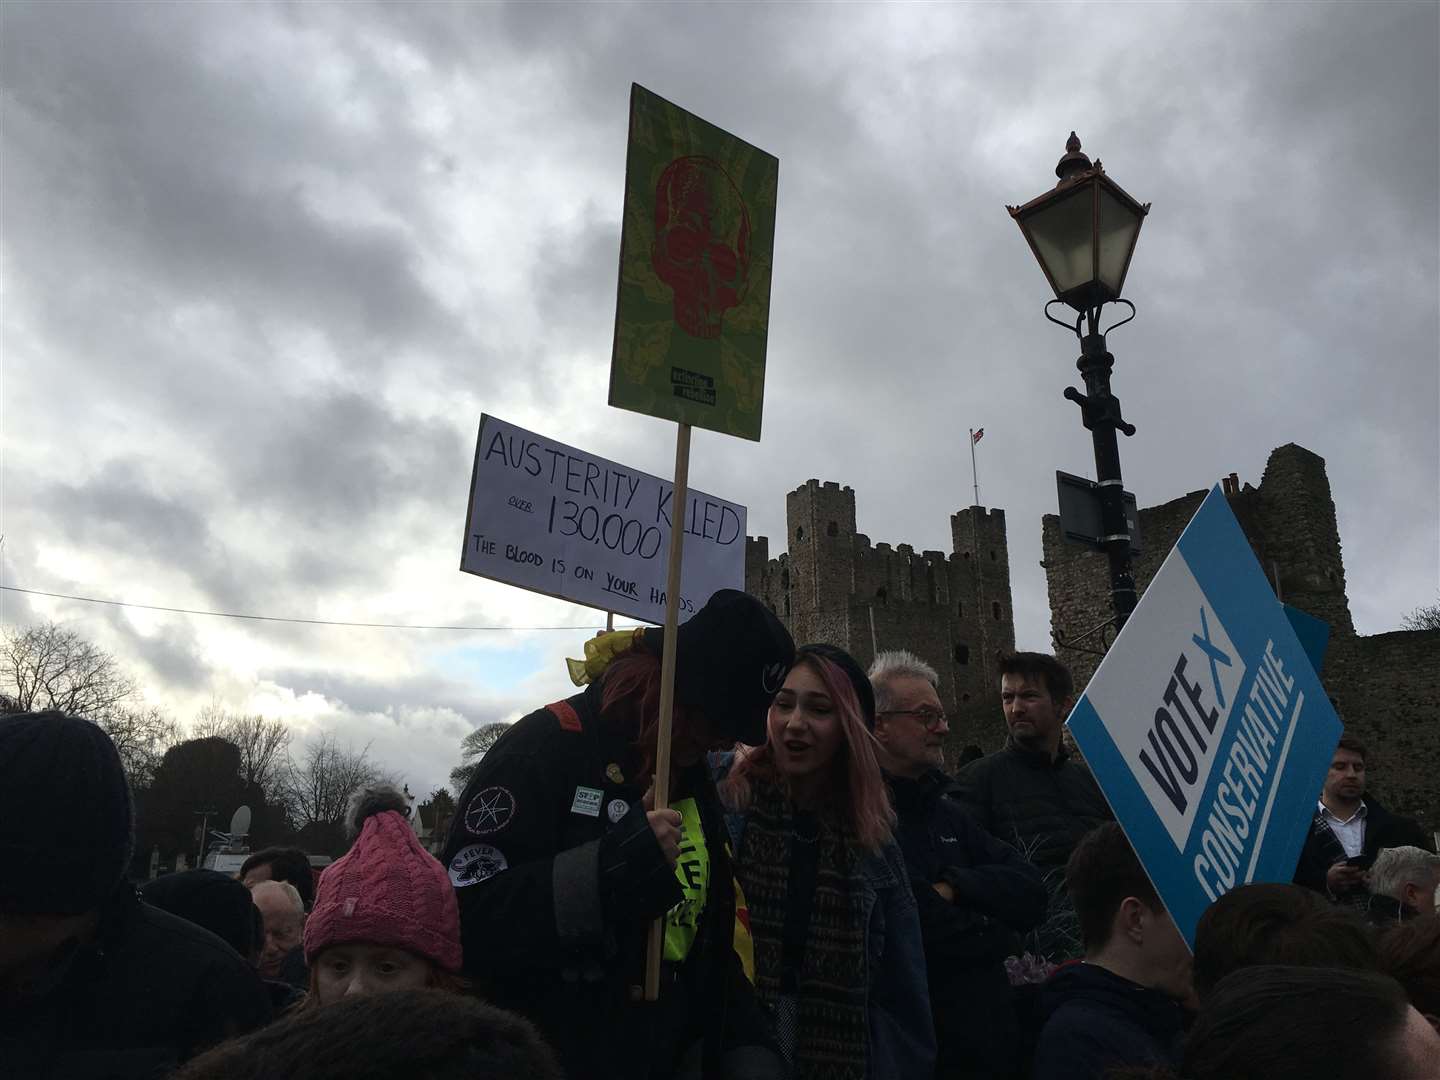 Opponents were among the crowds with Conservative campaigners